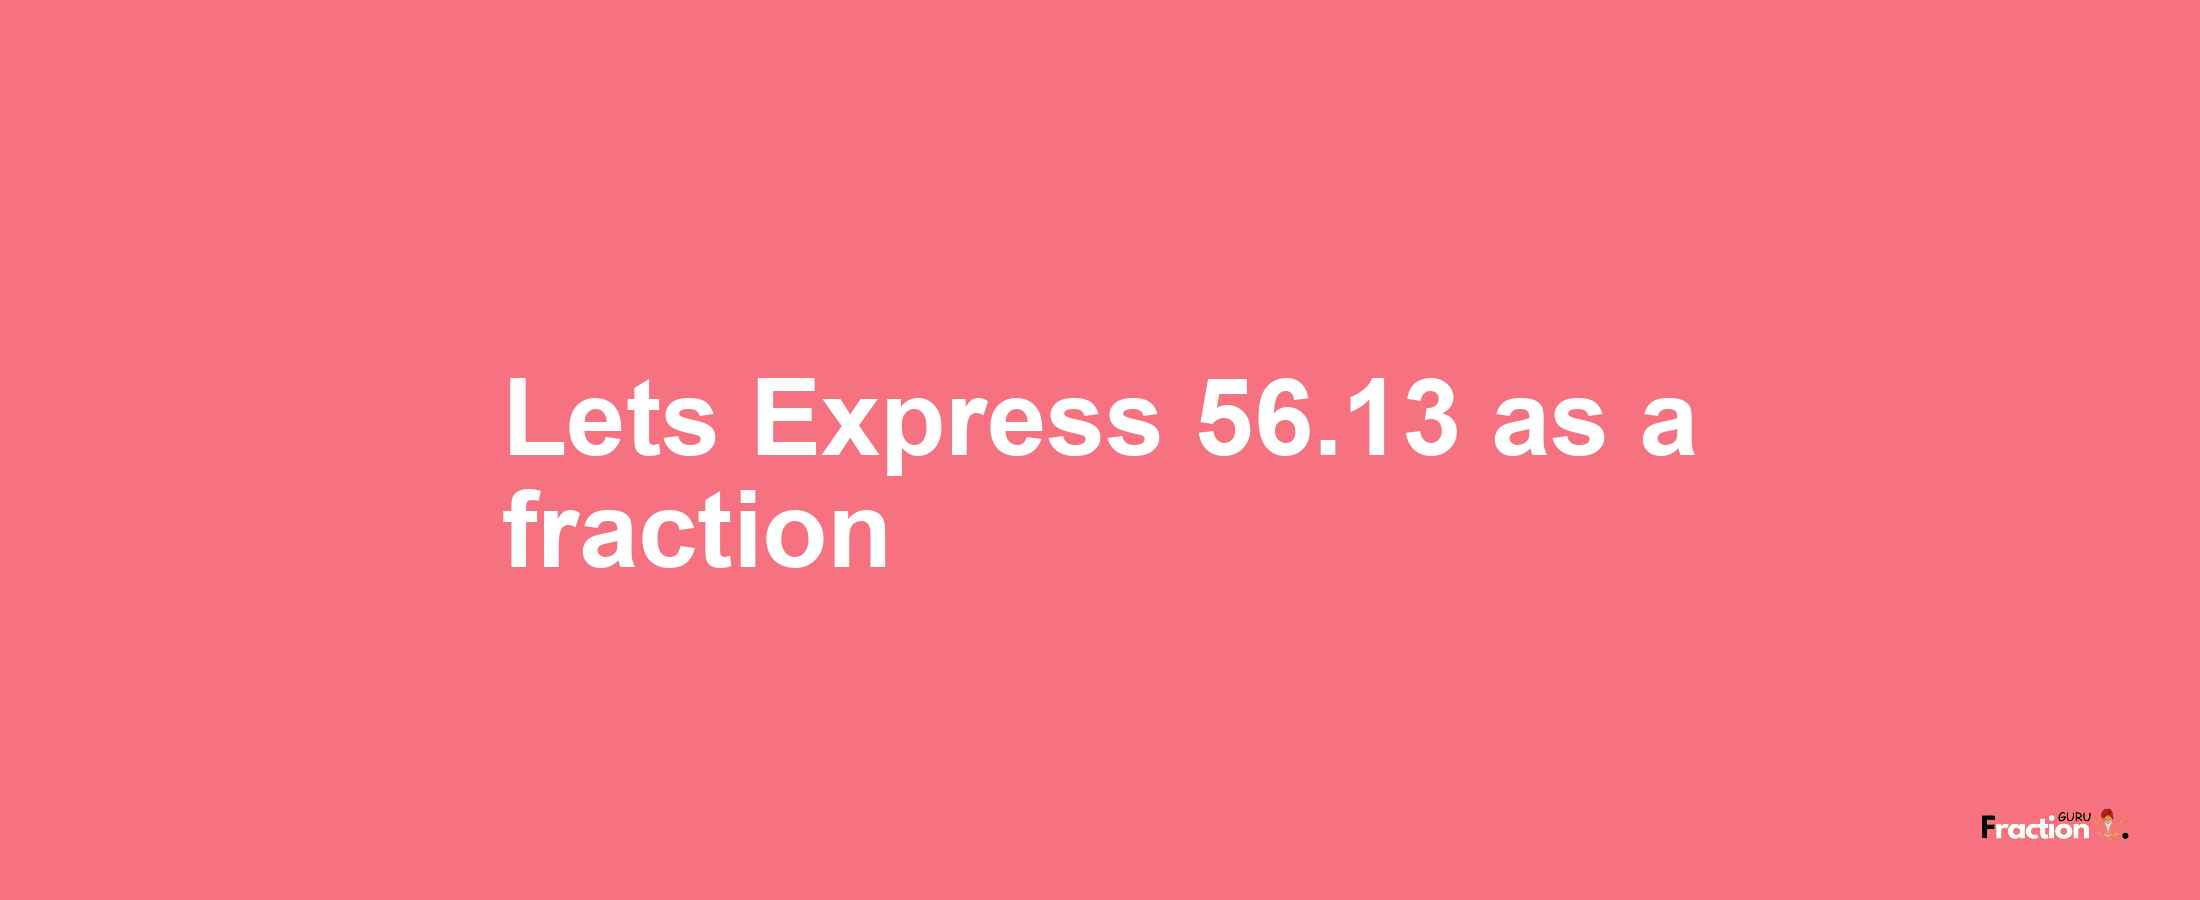 Lets Express 56.13 as afraction